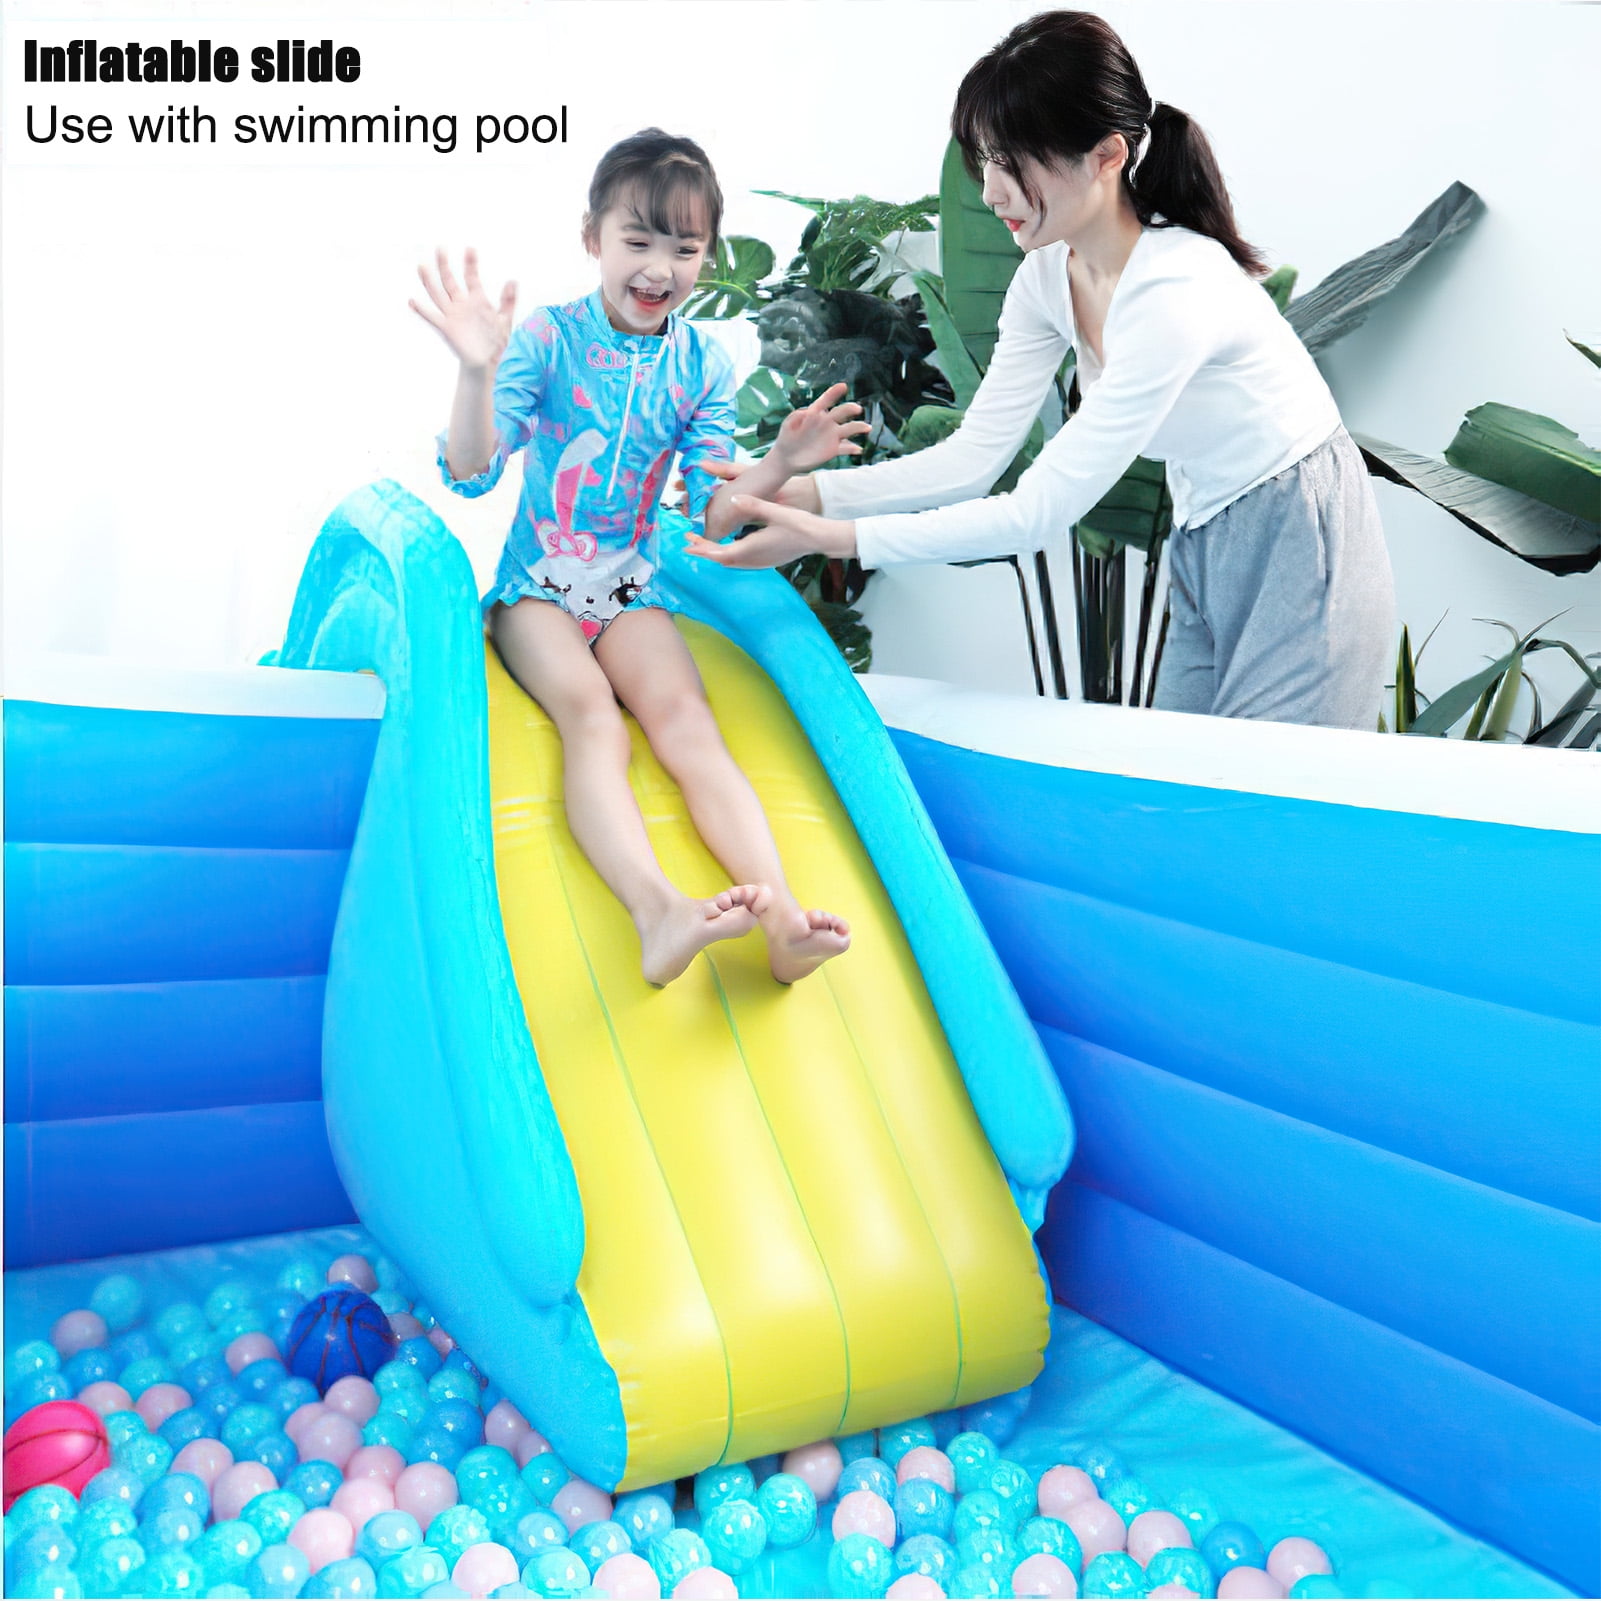 Dolu 3 in 1 My First Slide and Inflatable Blow Up Pool ball Pit Set Garden Indoor Outdoor Playground Equipment Kids Childrens Toddler Toy Playset